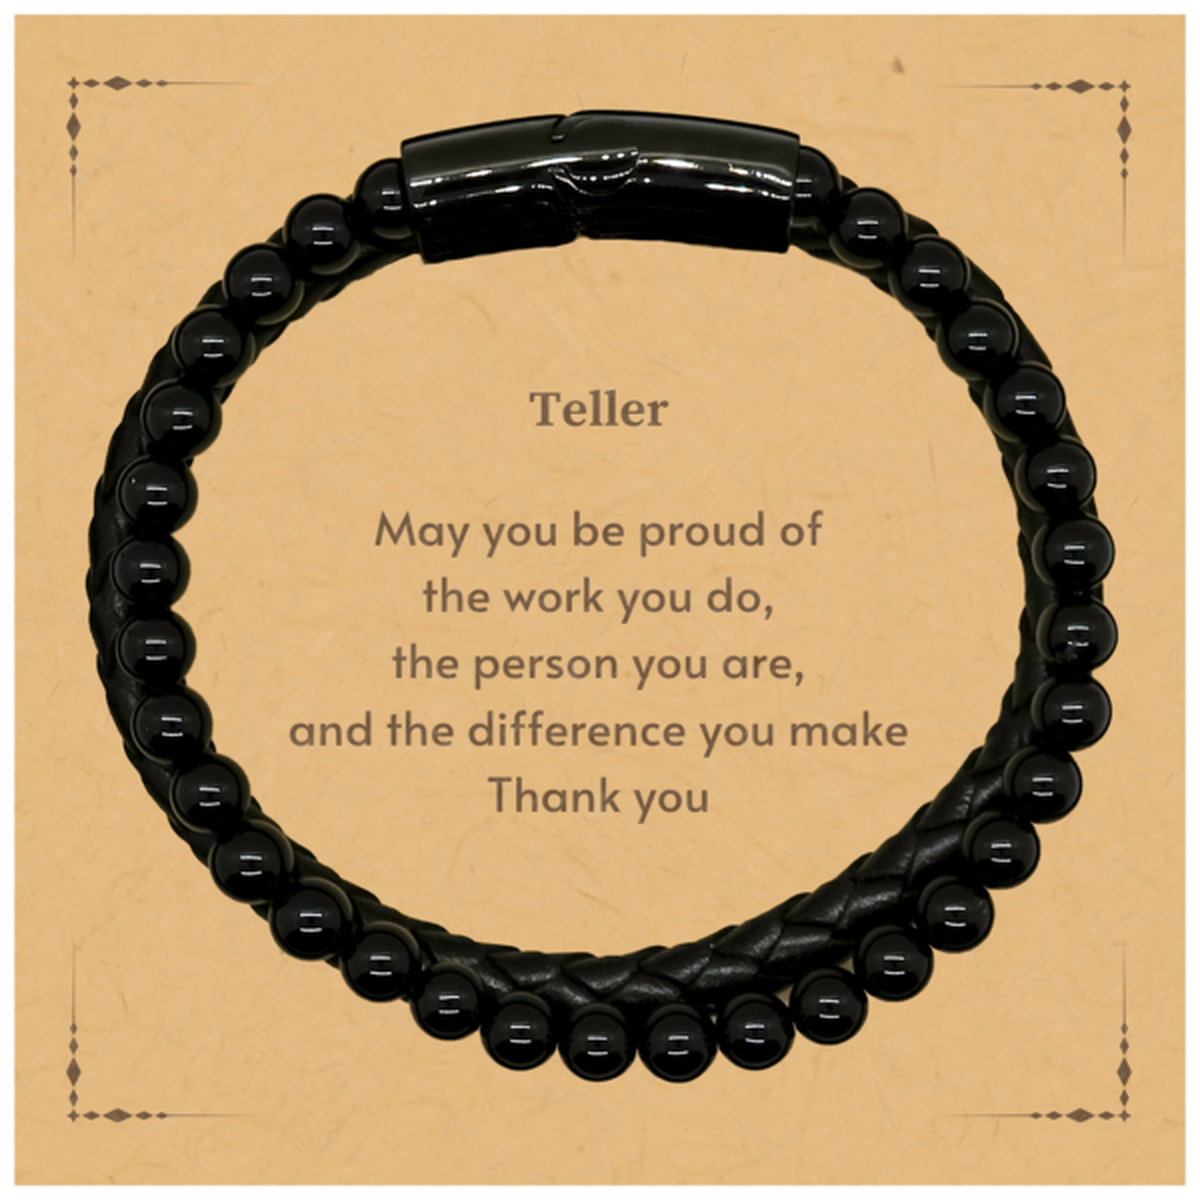 Heartwarming Stone Leather Bracelets Retirement Coworkers Gifts for Teller, Teller May You be proud of the work you do, the person you are Gifts for Boss Men Women Friends